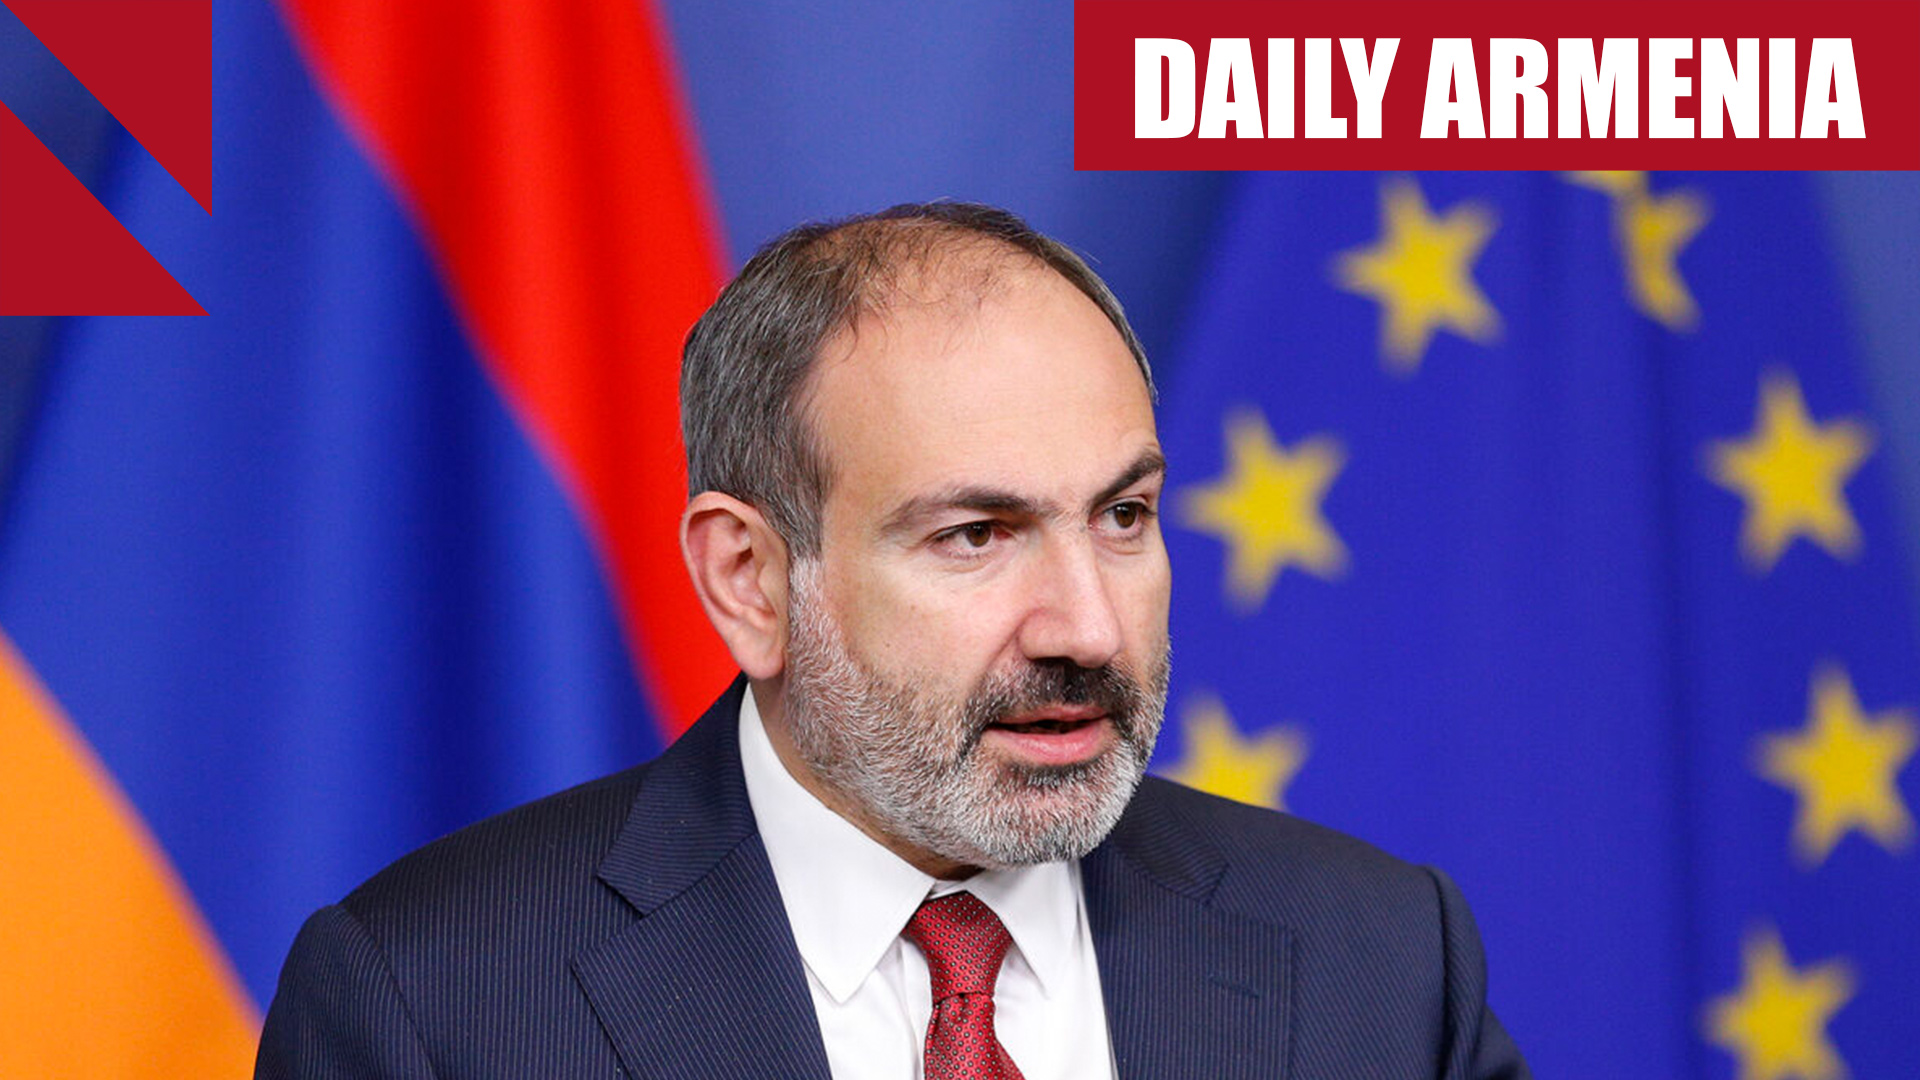 Armenia remains committed to nuclear energy, prime minister says